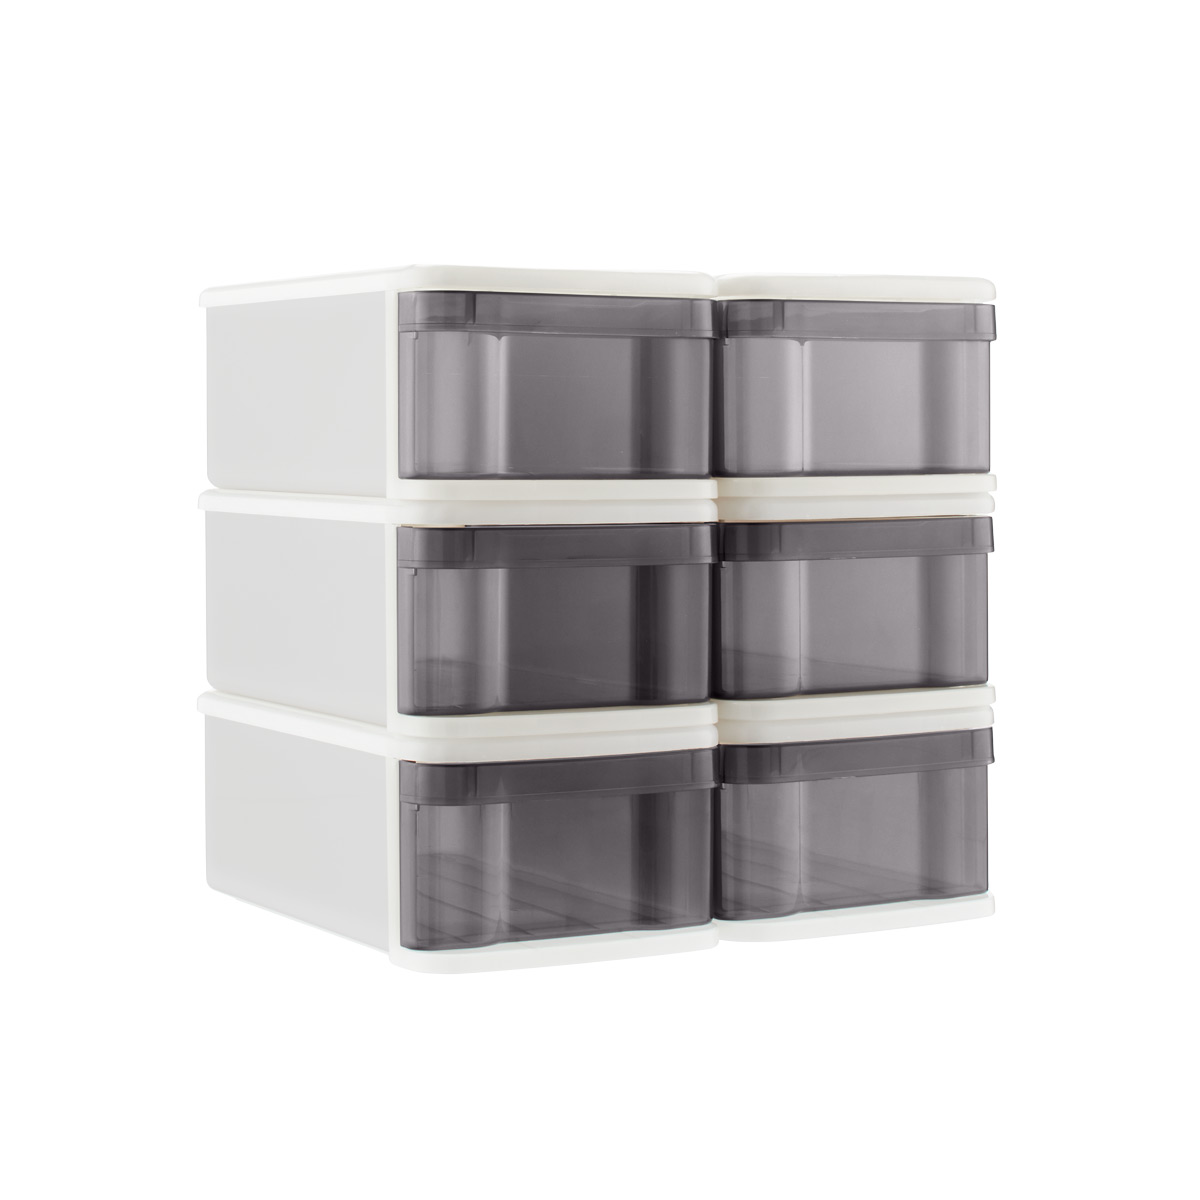 Small Tint Stackable Storage Drawer, Grey, 15.375 x 8.75 x 5.75 – Pack of 6  – Find Organizers That Fit